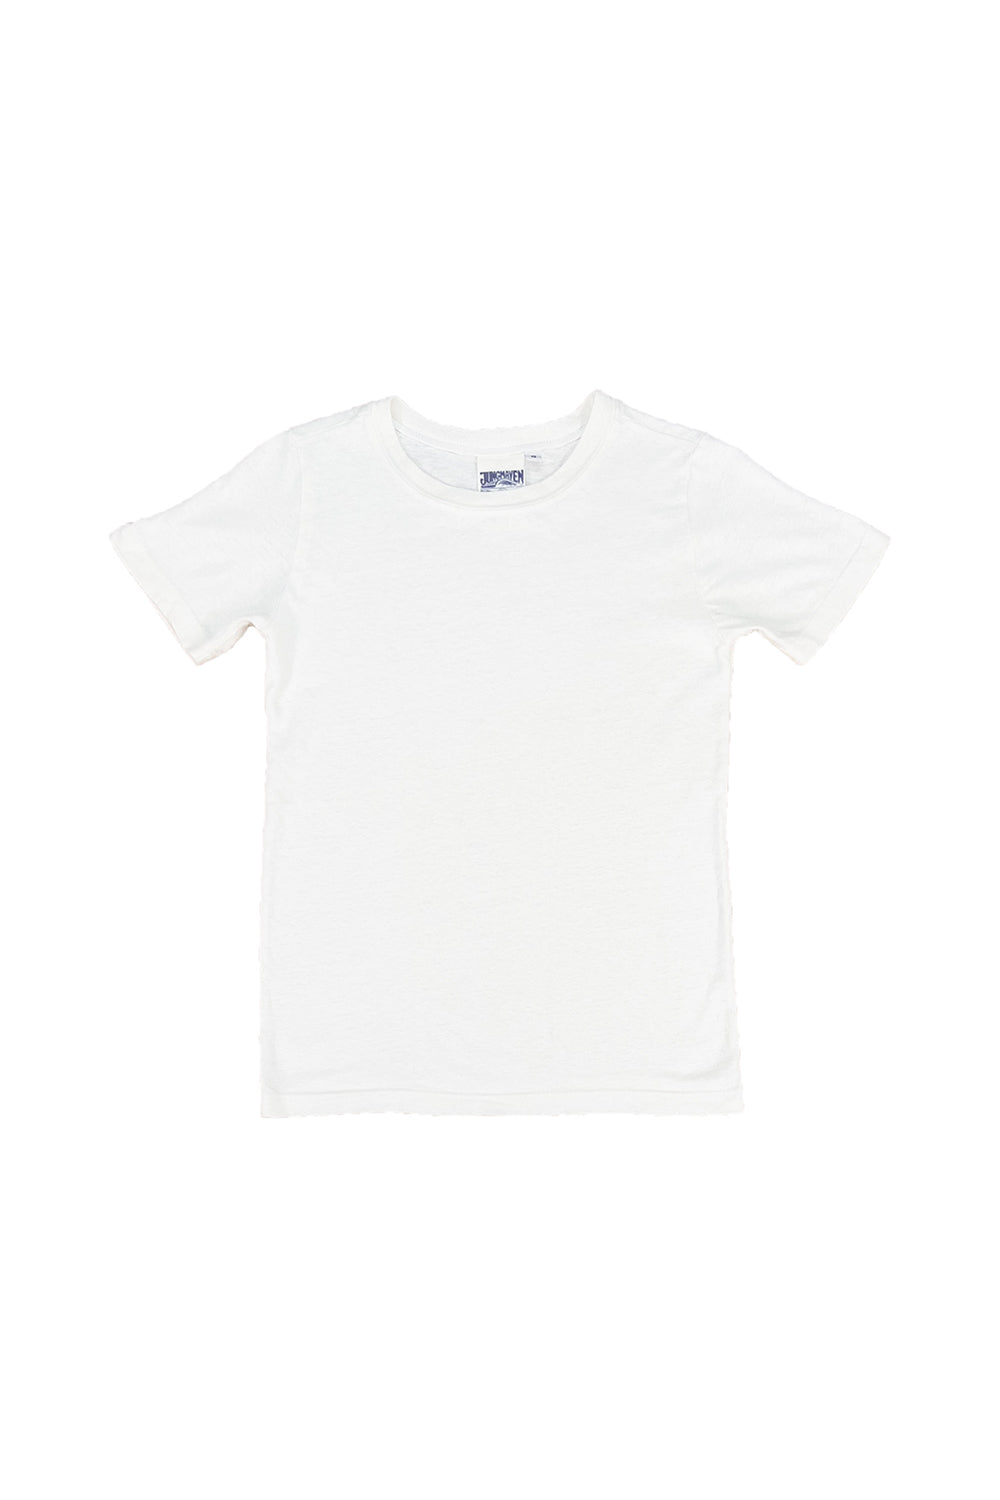 Grom Tee | Jungmaven Hemp Clothing & Accessories / Color: Washed White